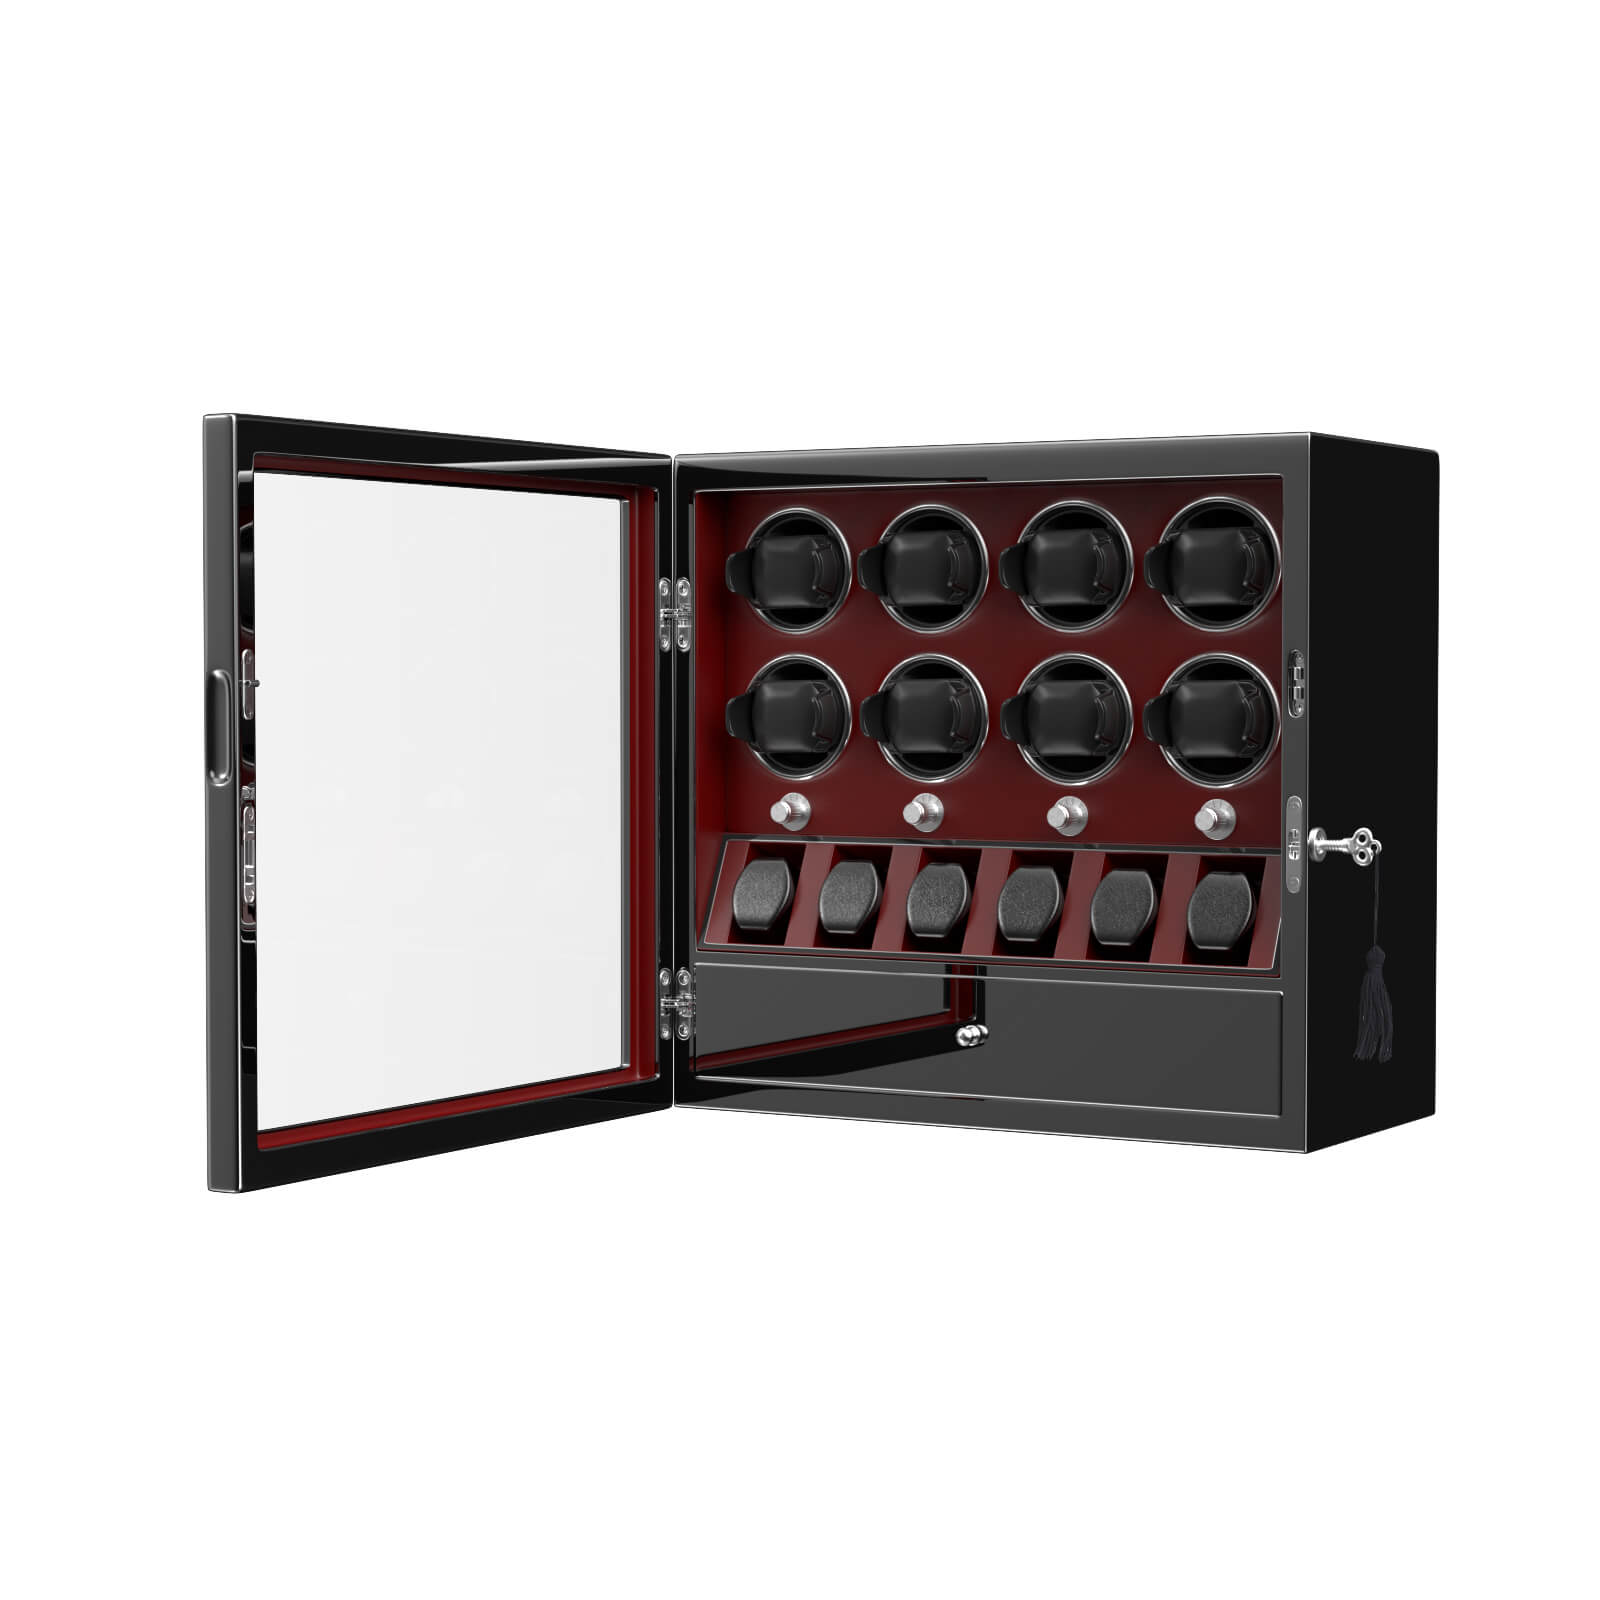 Compact 8 Watch Winders with 6 Watches Organizer Case Automatic Rotation - Red